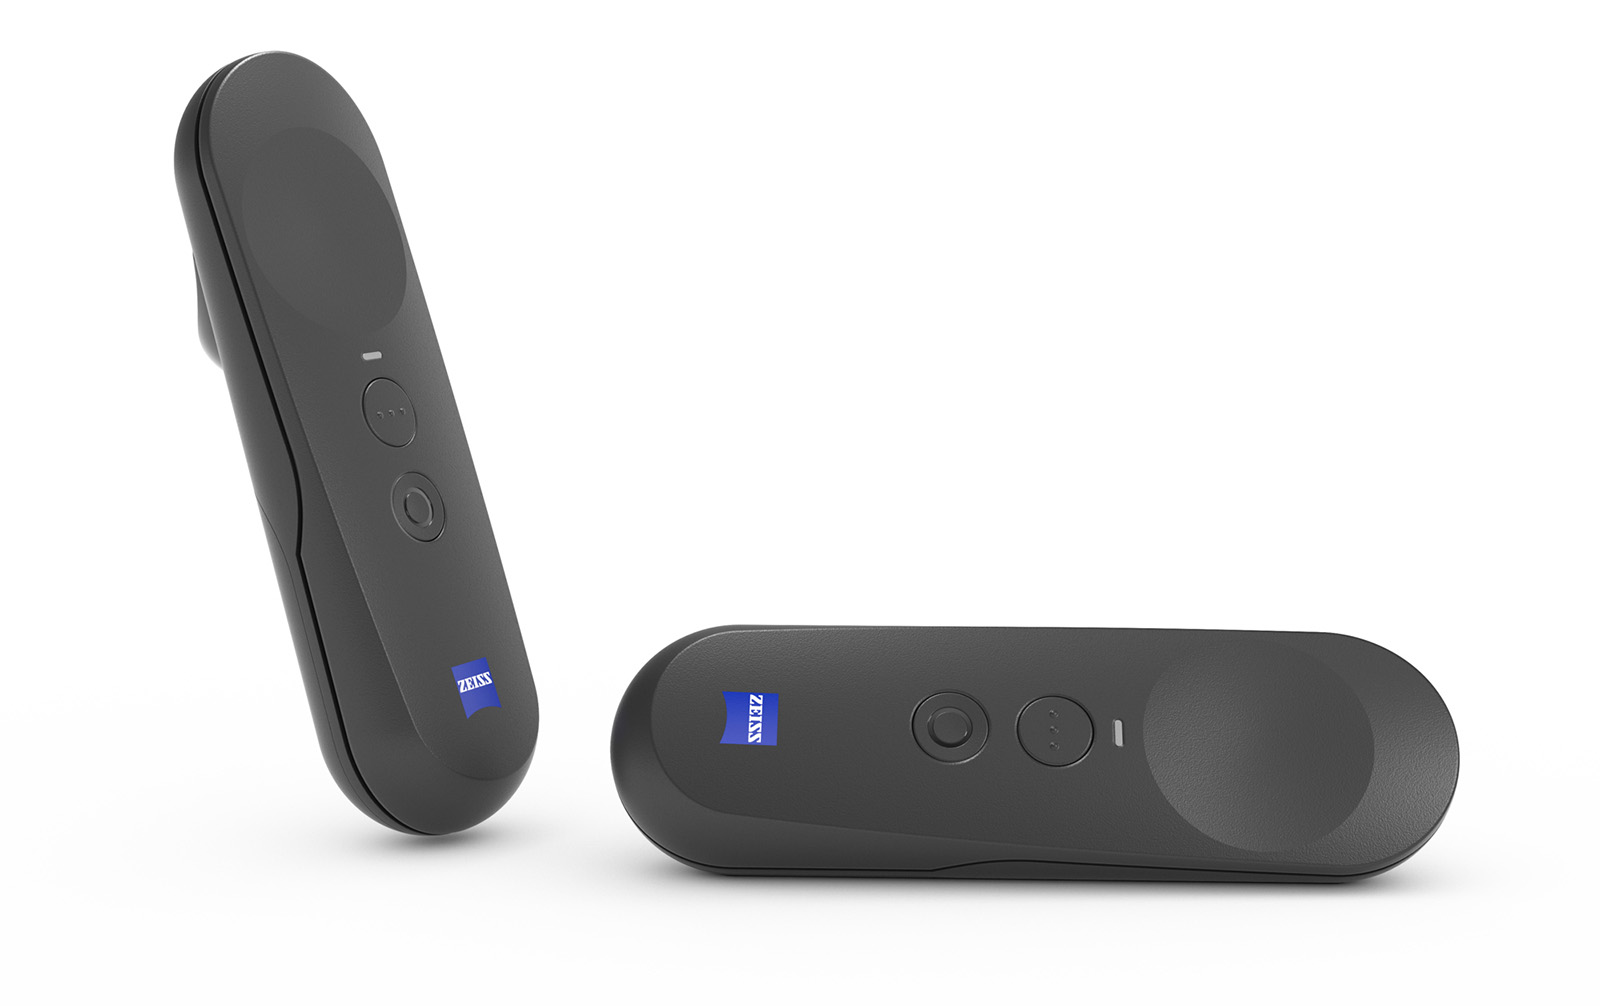 ZEISS VR ONE Connect features two wireless controllers and combines the graphical possibilities of PC-connected VR headsets with the simplicity afforded by a mobile VR headset.